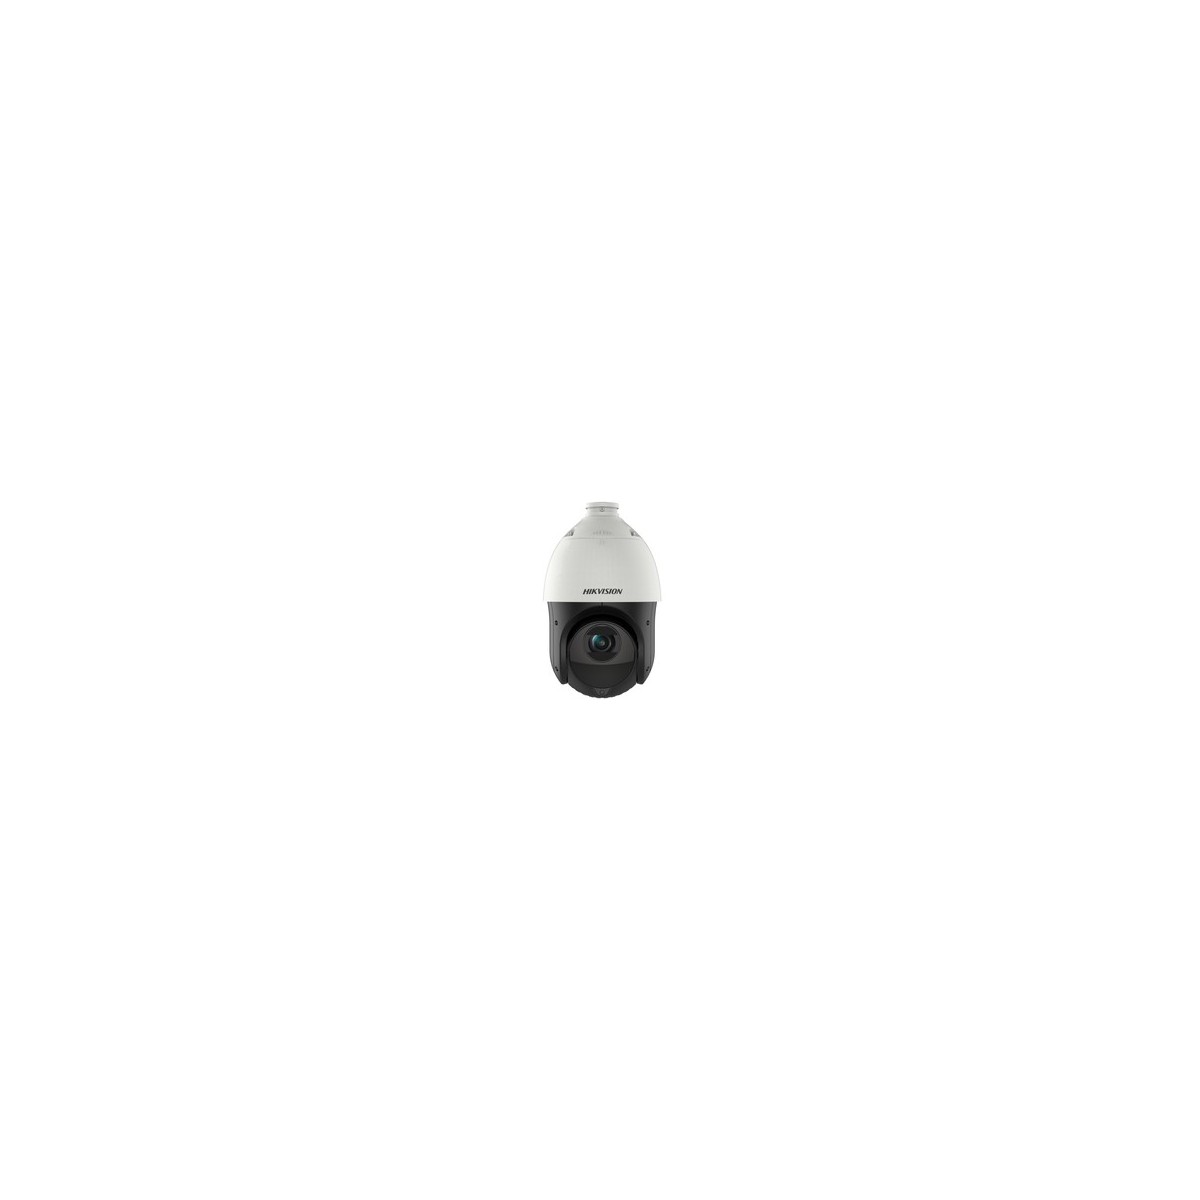 Hikvision Digital Technology DS-2DE4225IW-DE(T5) - IP security camera - Outdoor - Wired - Ceiling-wall - White - Dome